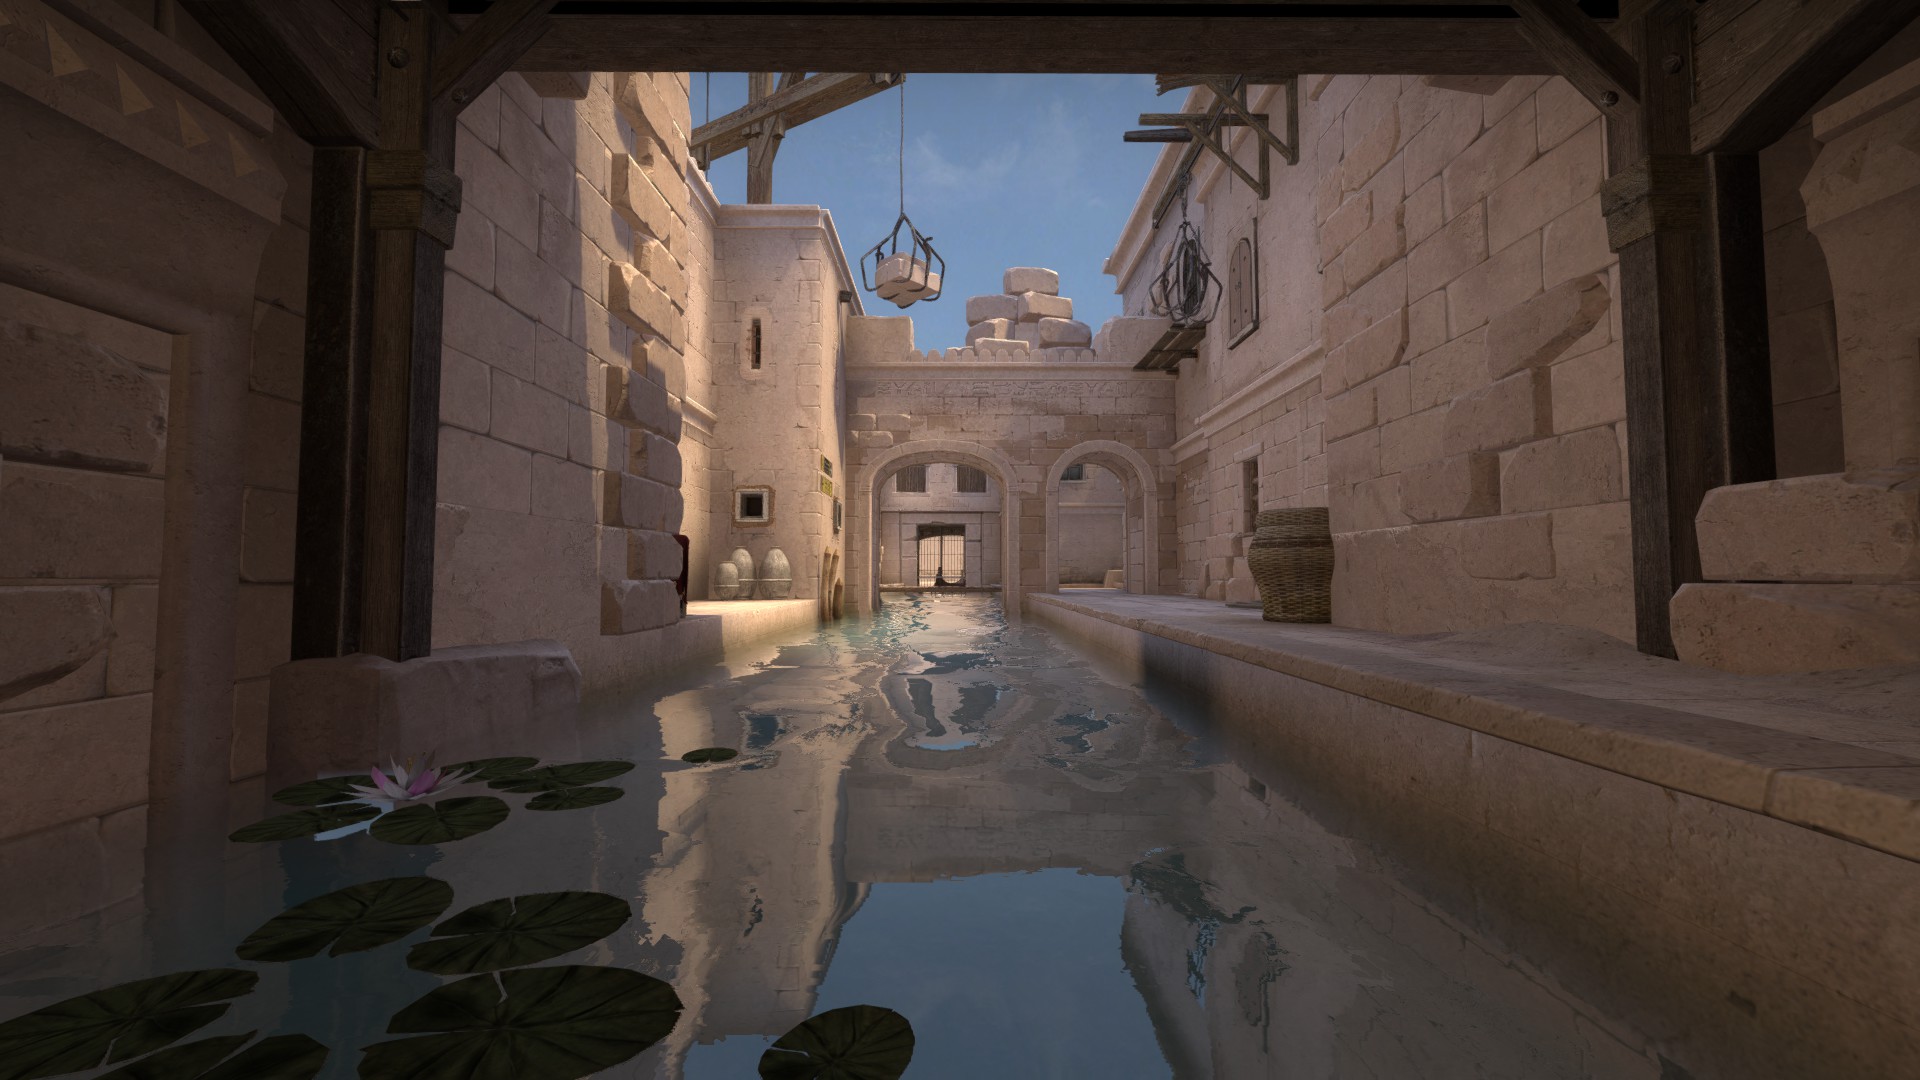 Anubis became the second community map added to the tournament pool